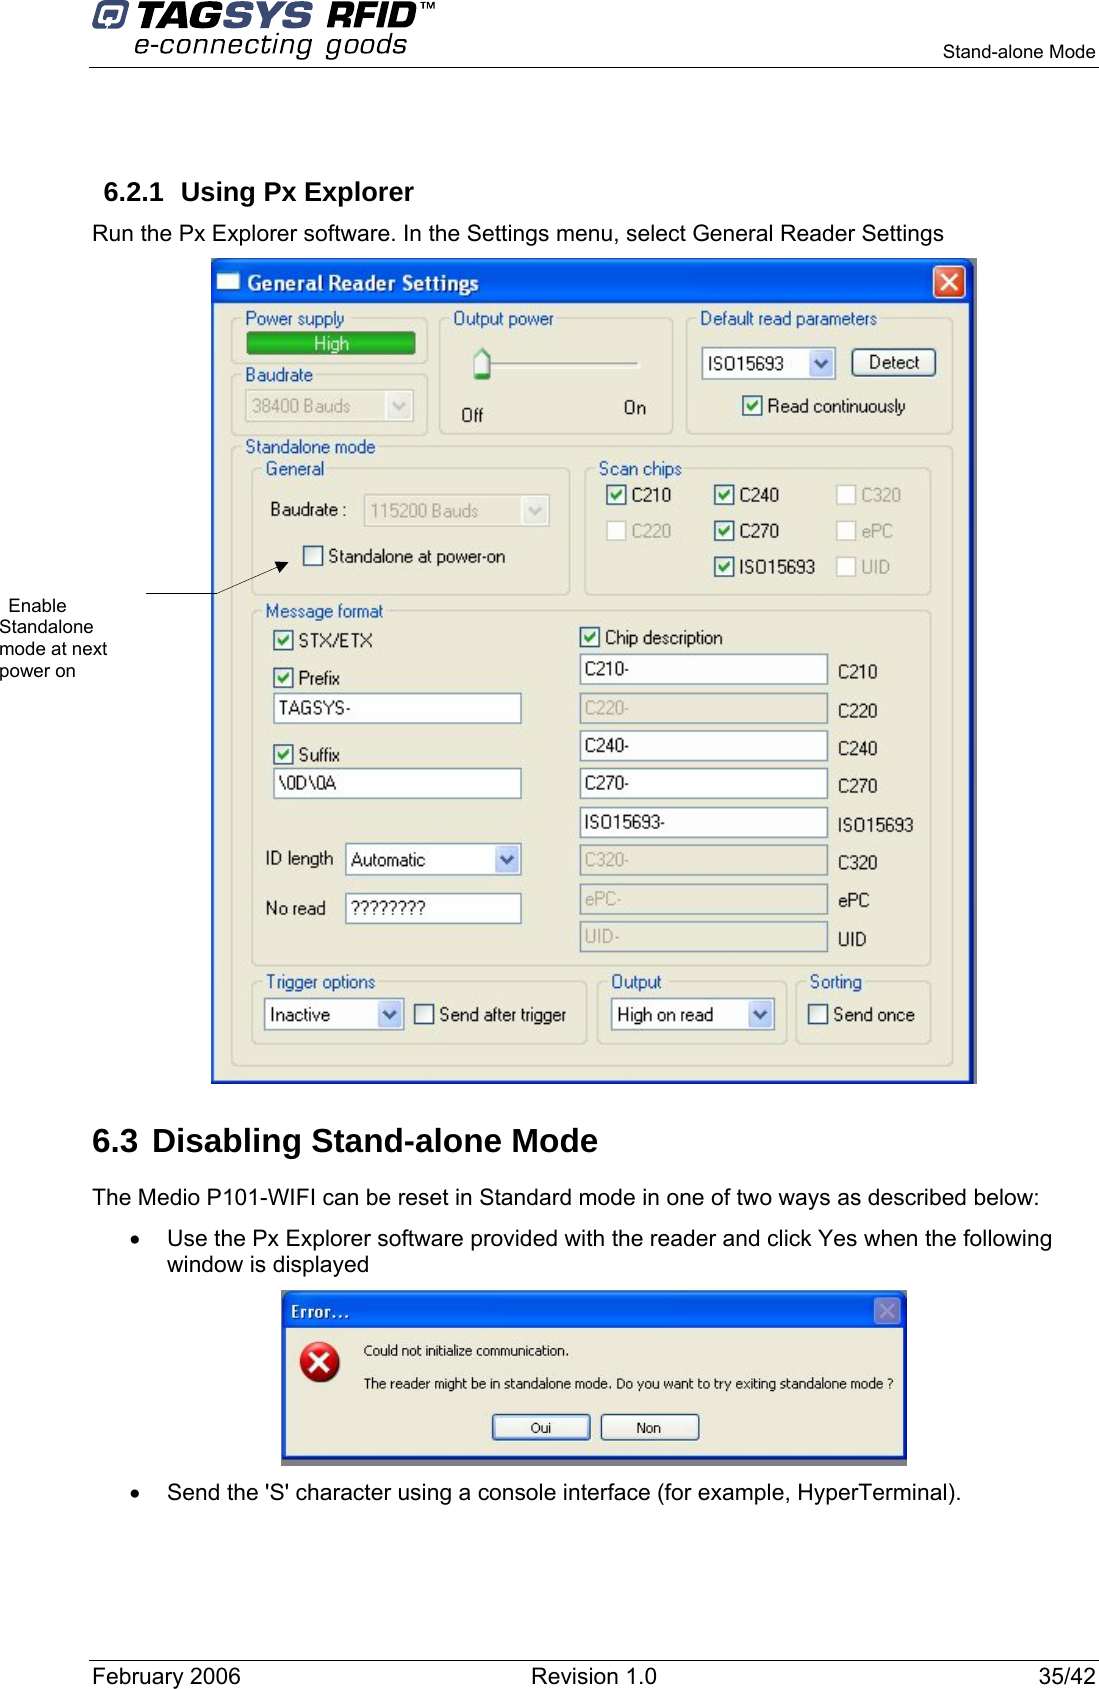    Stand-alone Mode  February 2006  Revision 1.0  35/42  6.2.1 Using Px Explorer Run the Px Explorer software. In the Settings menu, select General Reader Settings  6.3 Disabling Stand-alone Mode The Medio P101-WIFI can be reset in Standard mode in one of two ways as described below: •  Use the Px Explorer software provided with the reader and click Yes when the following window is displayed  •  Send the &apos;S&apos; character using a console interface (for example, HyperTerminal).   Enable    Standalone mode at next power on 